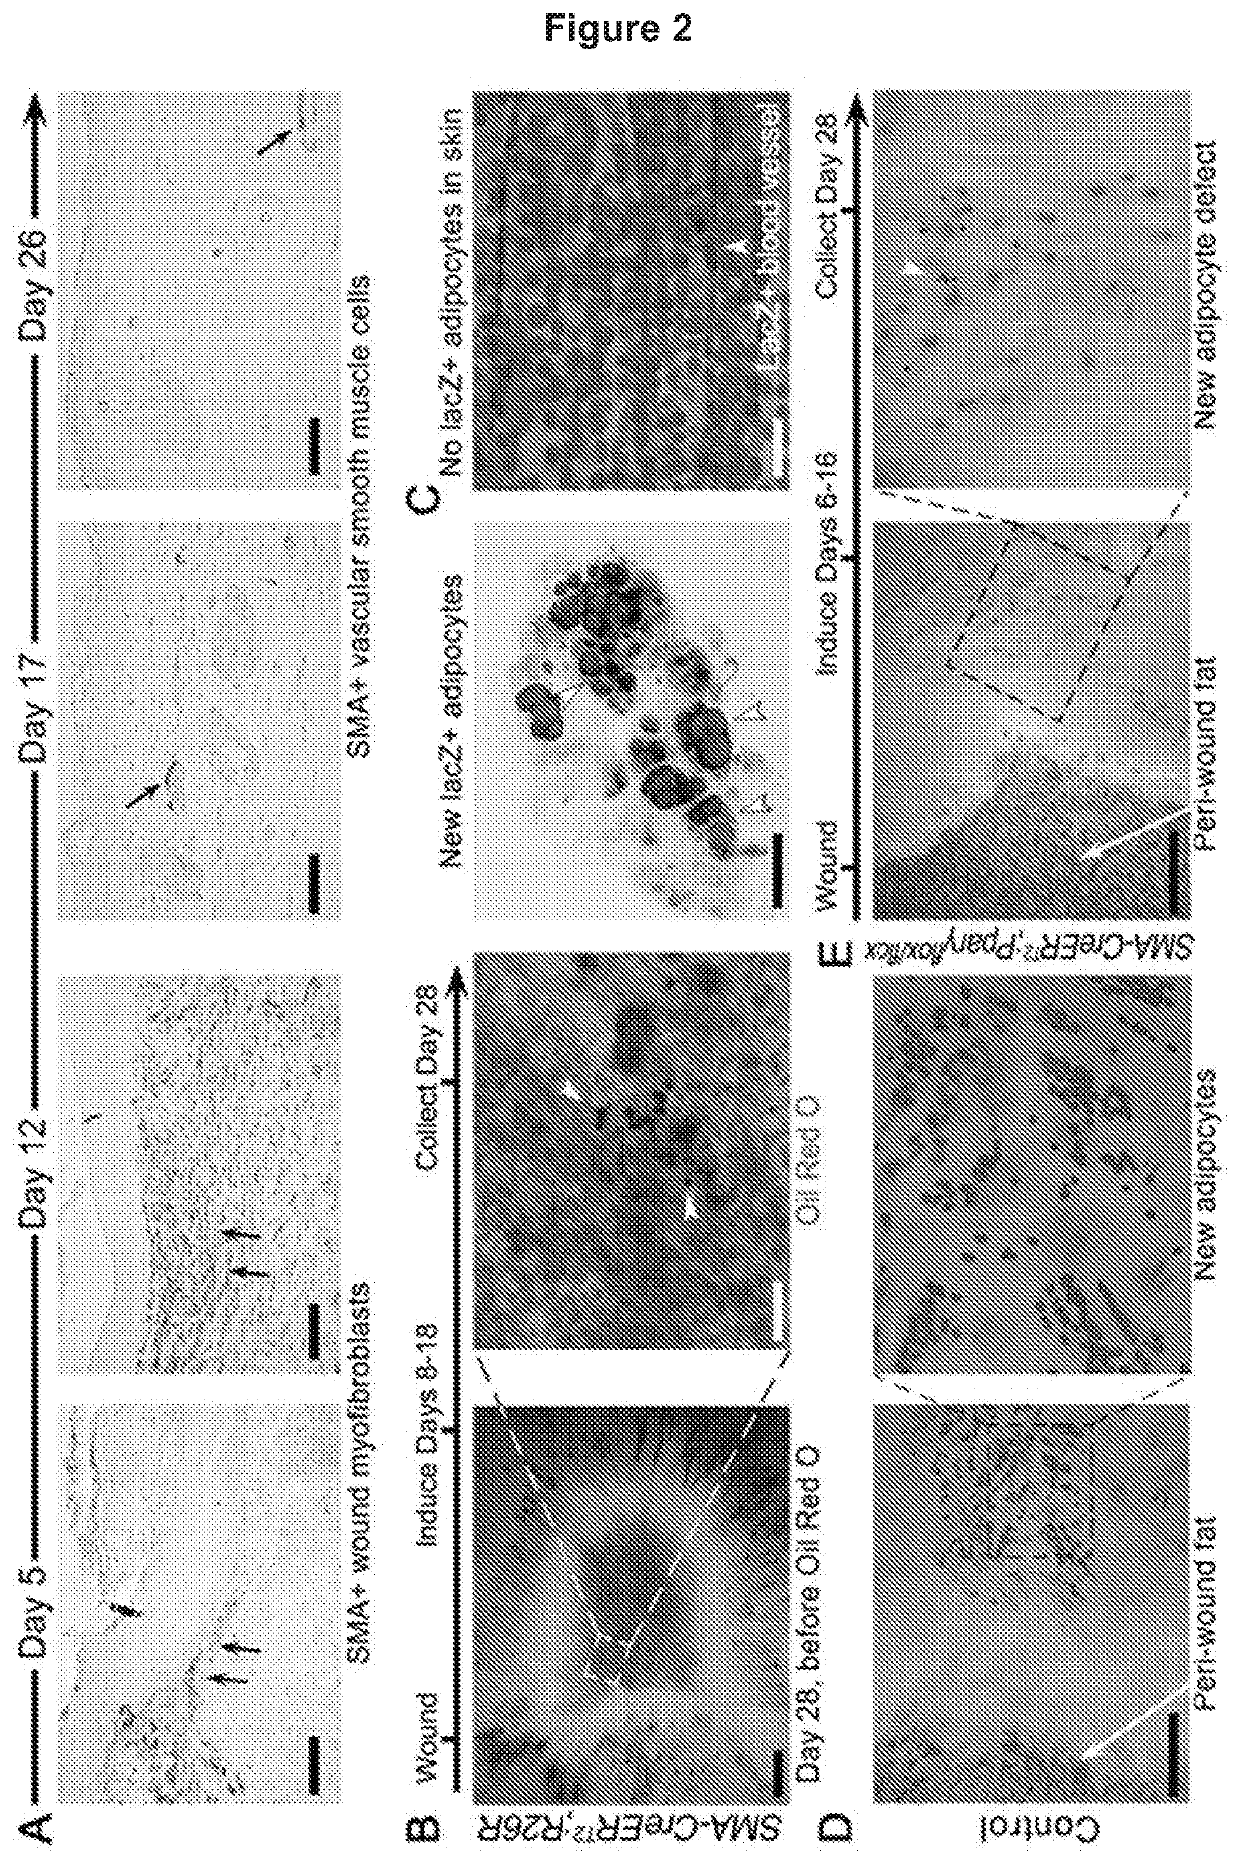 Methods for scar reduction by converting scar fibroblasts into adipocytes with hair follicle-derived signals